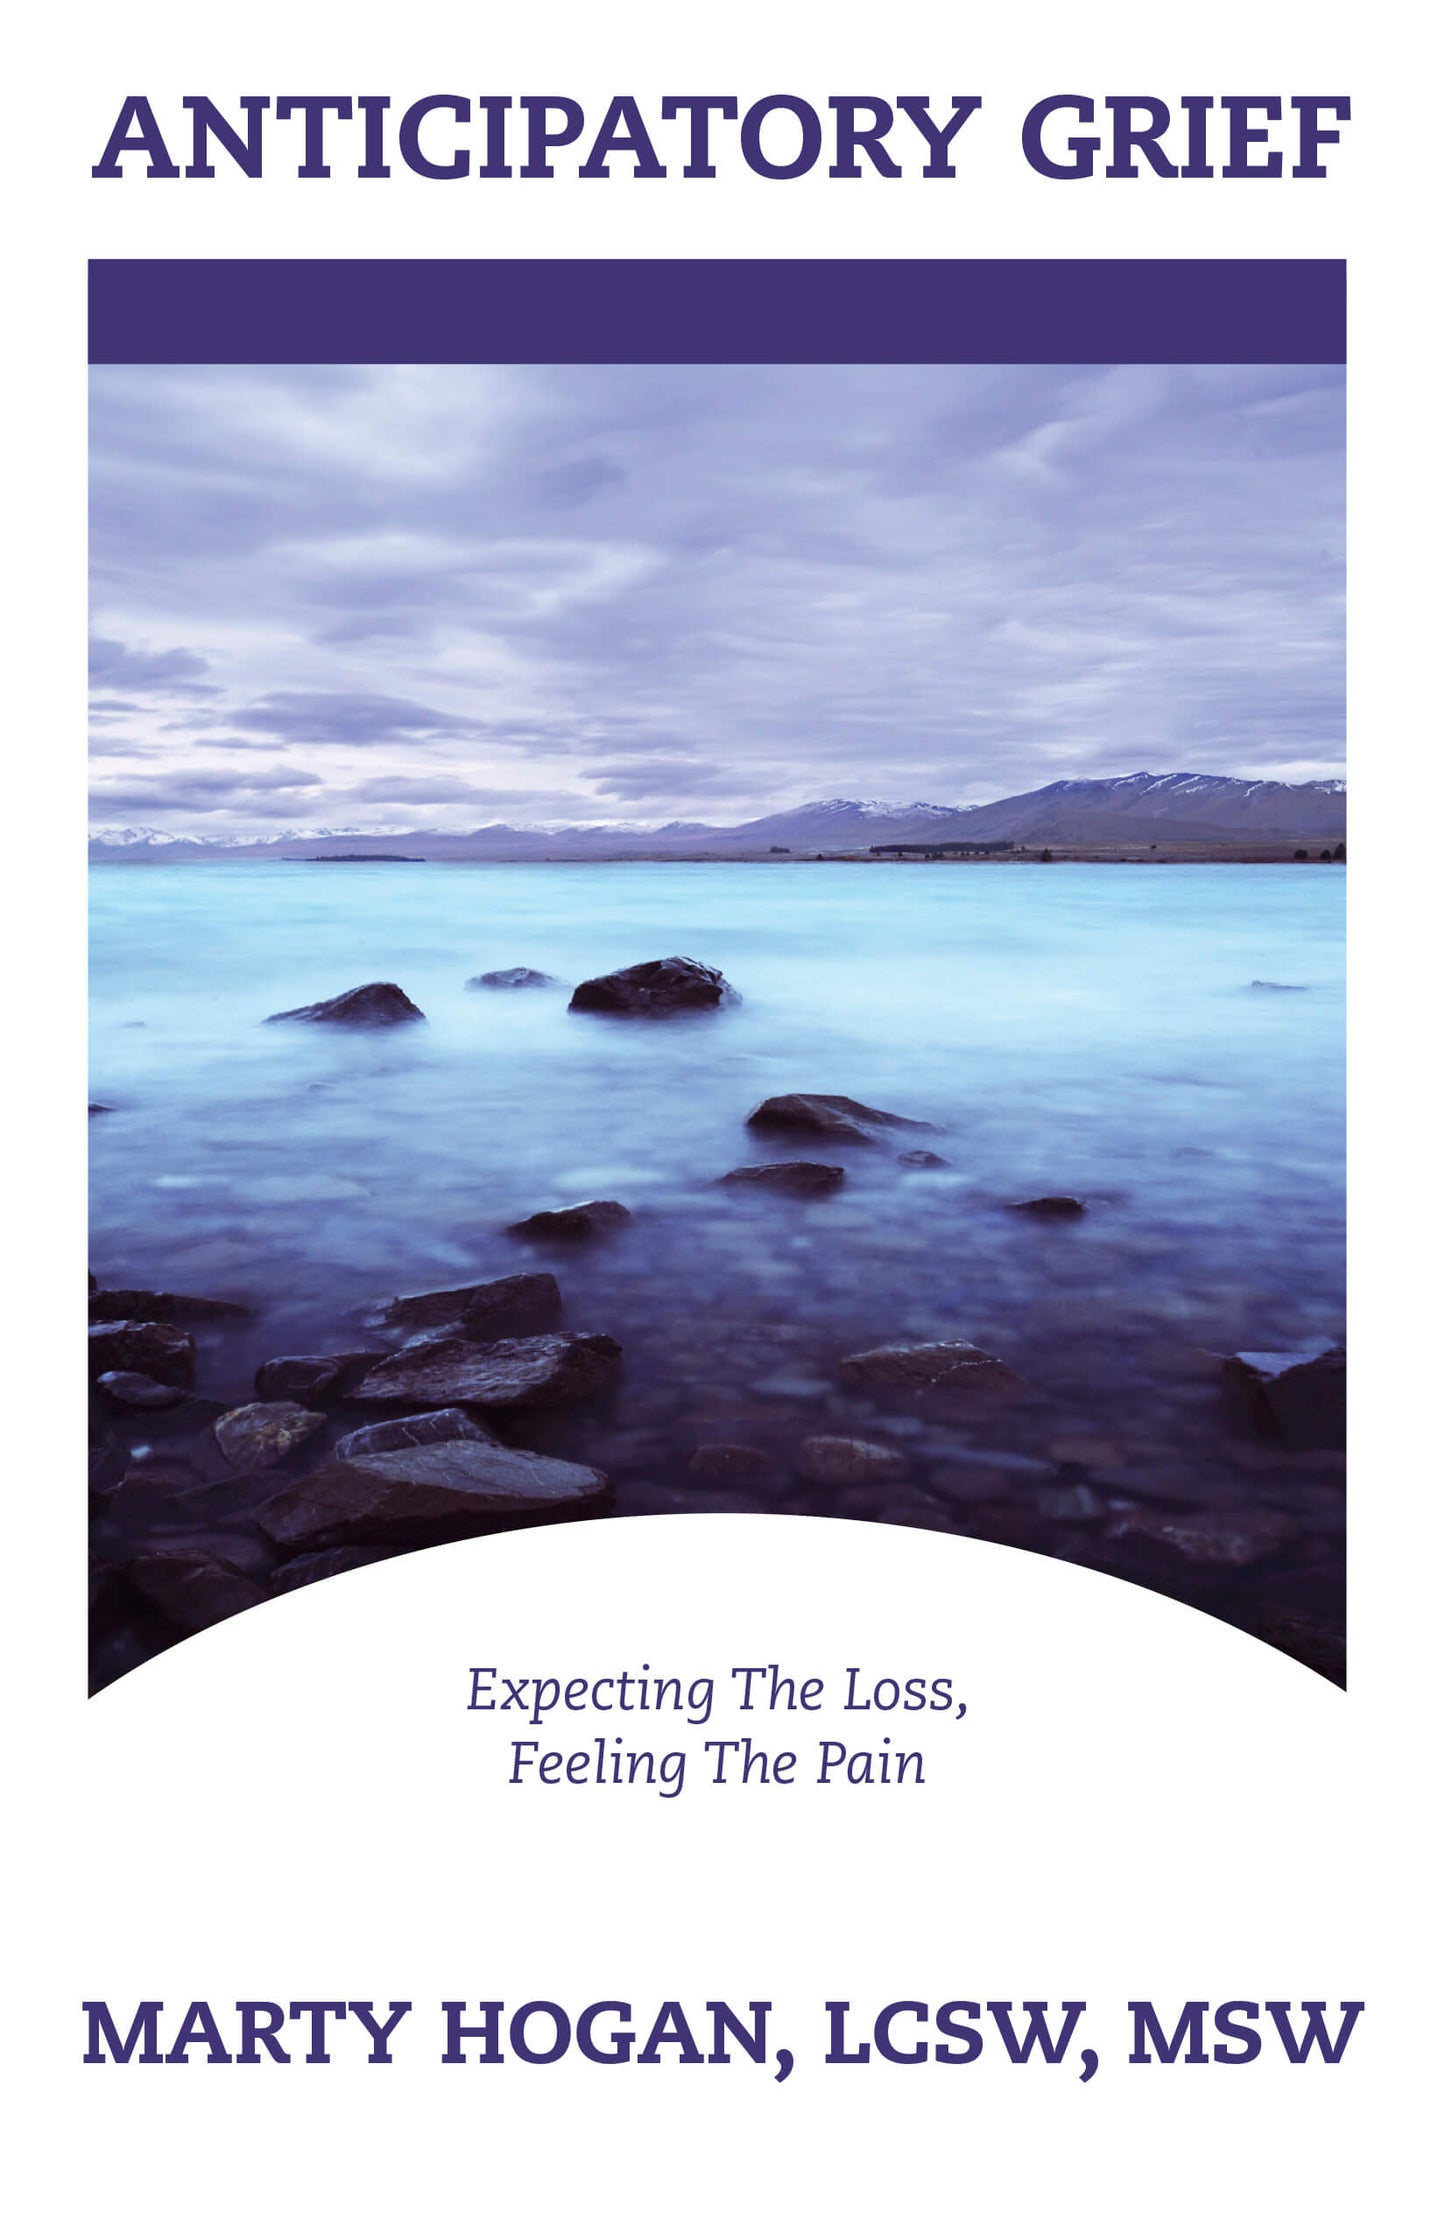 Anticipatory Grief - Expecting The Loss, Feeling The Pain